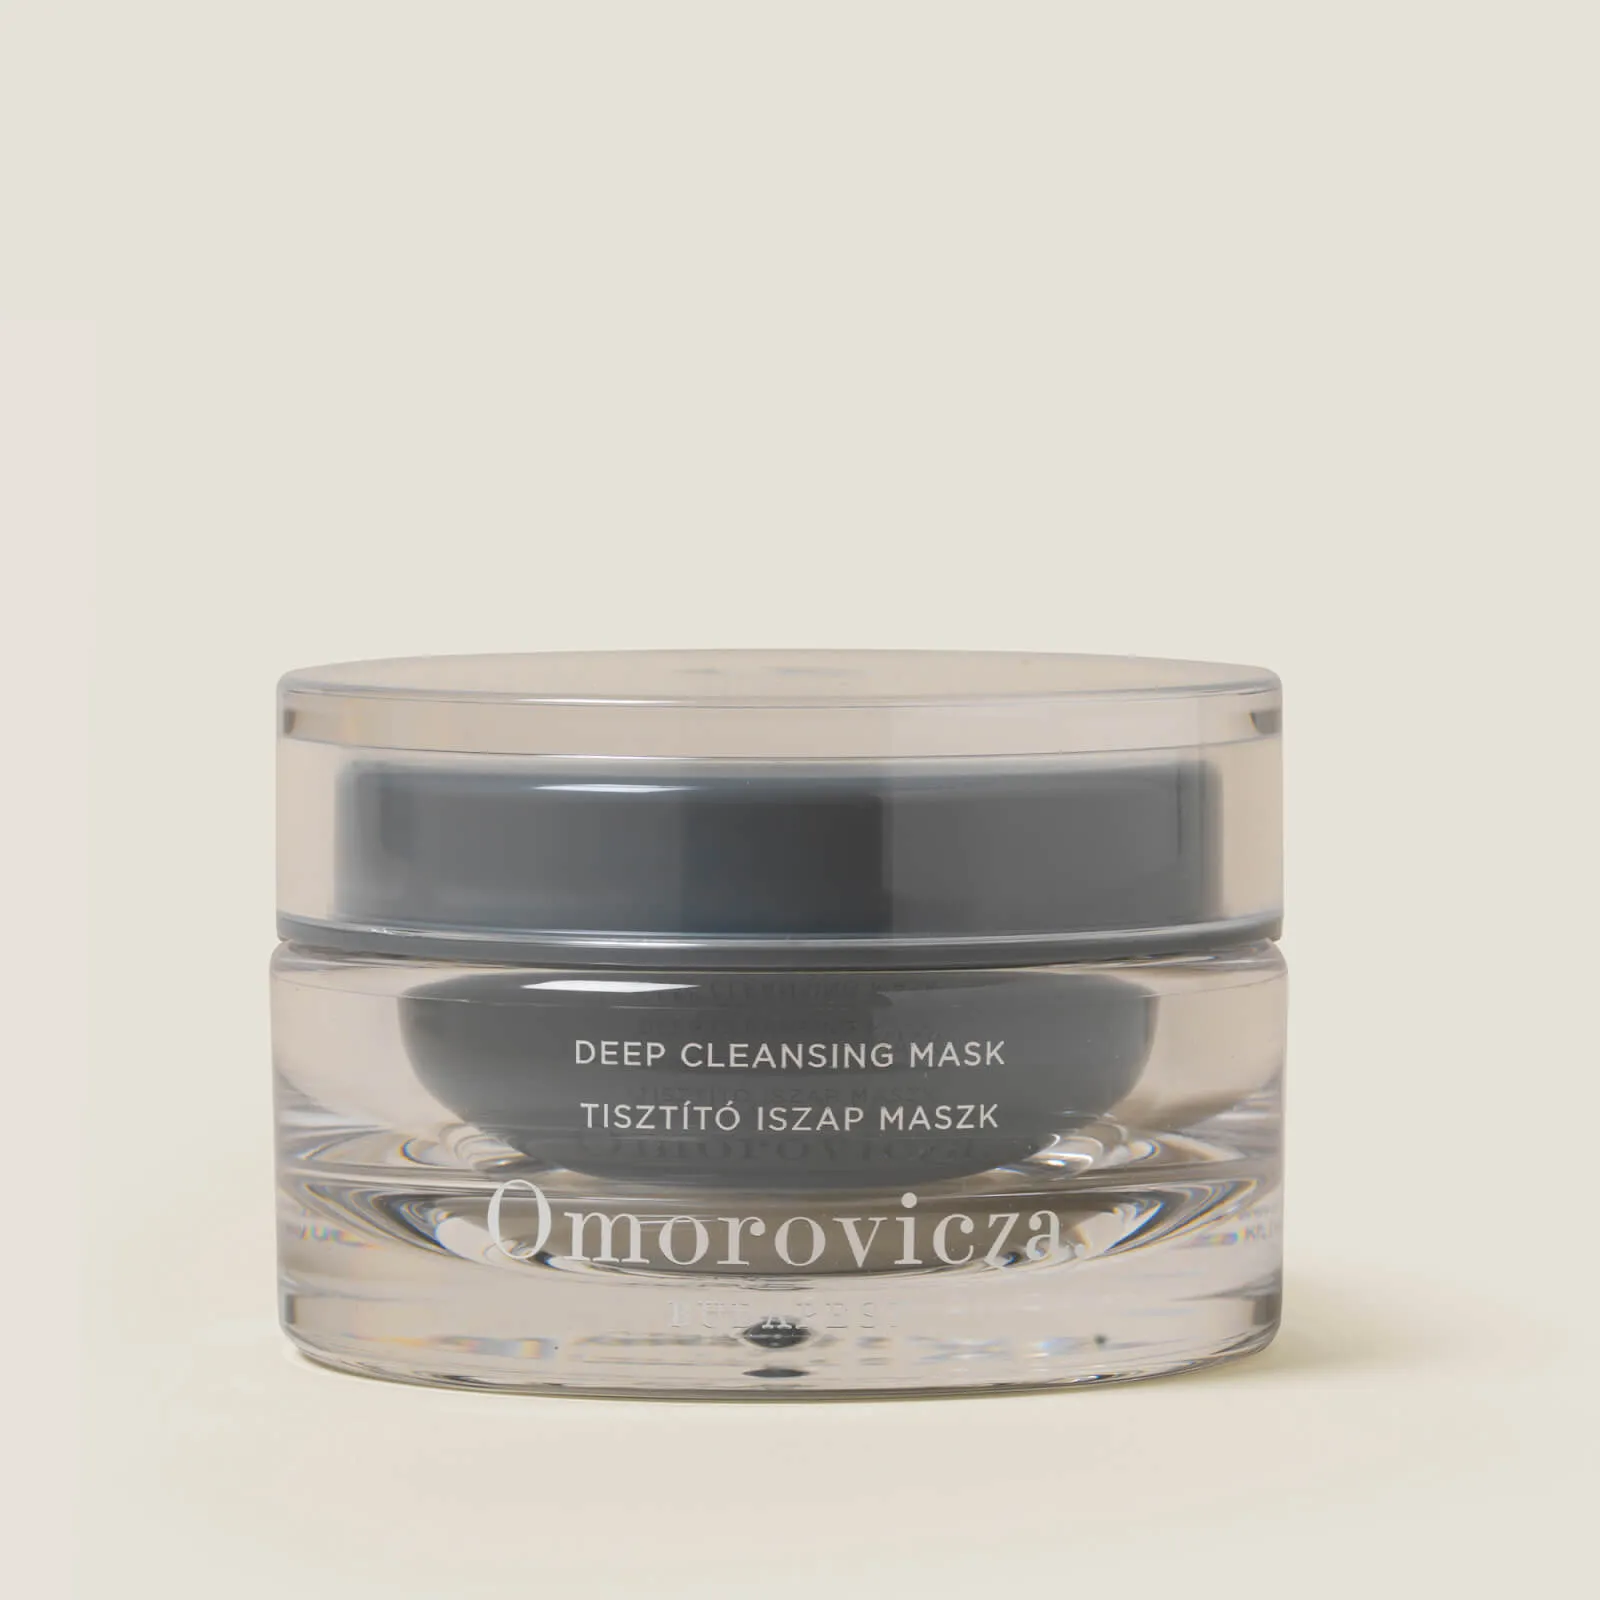  Deep Cleansing Mask 100ml